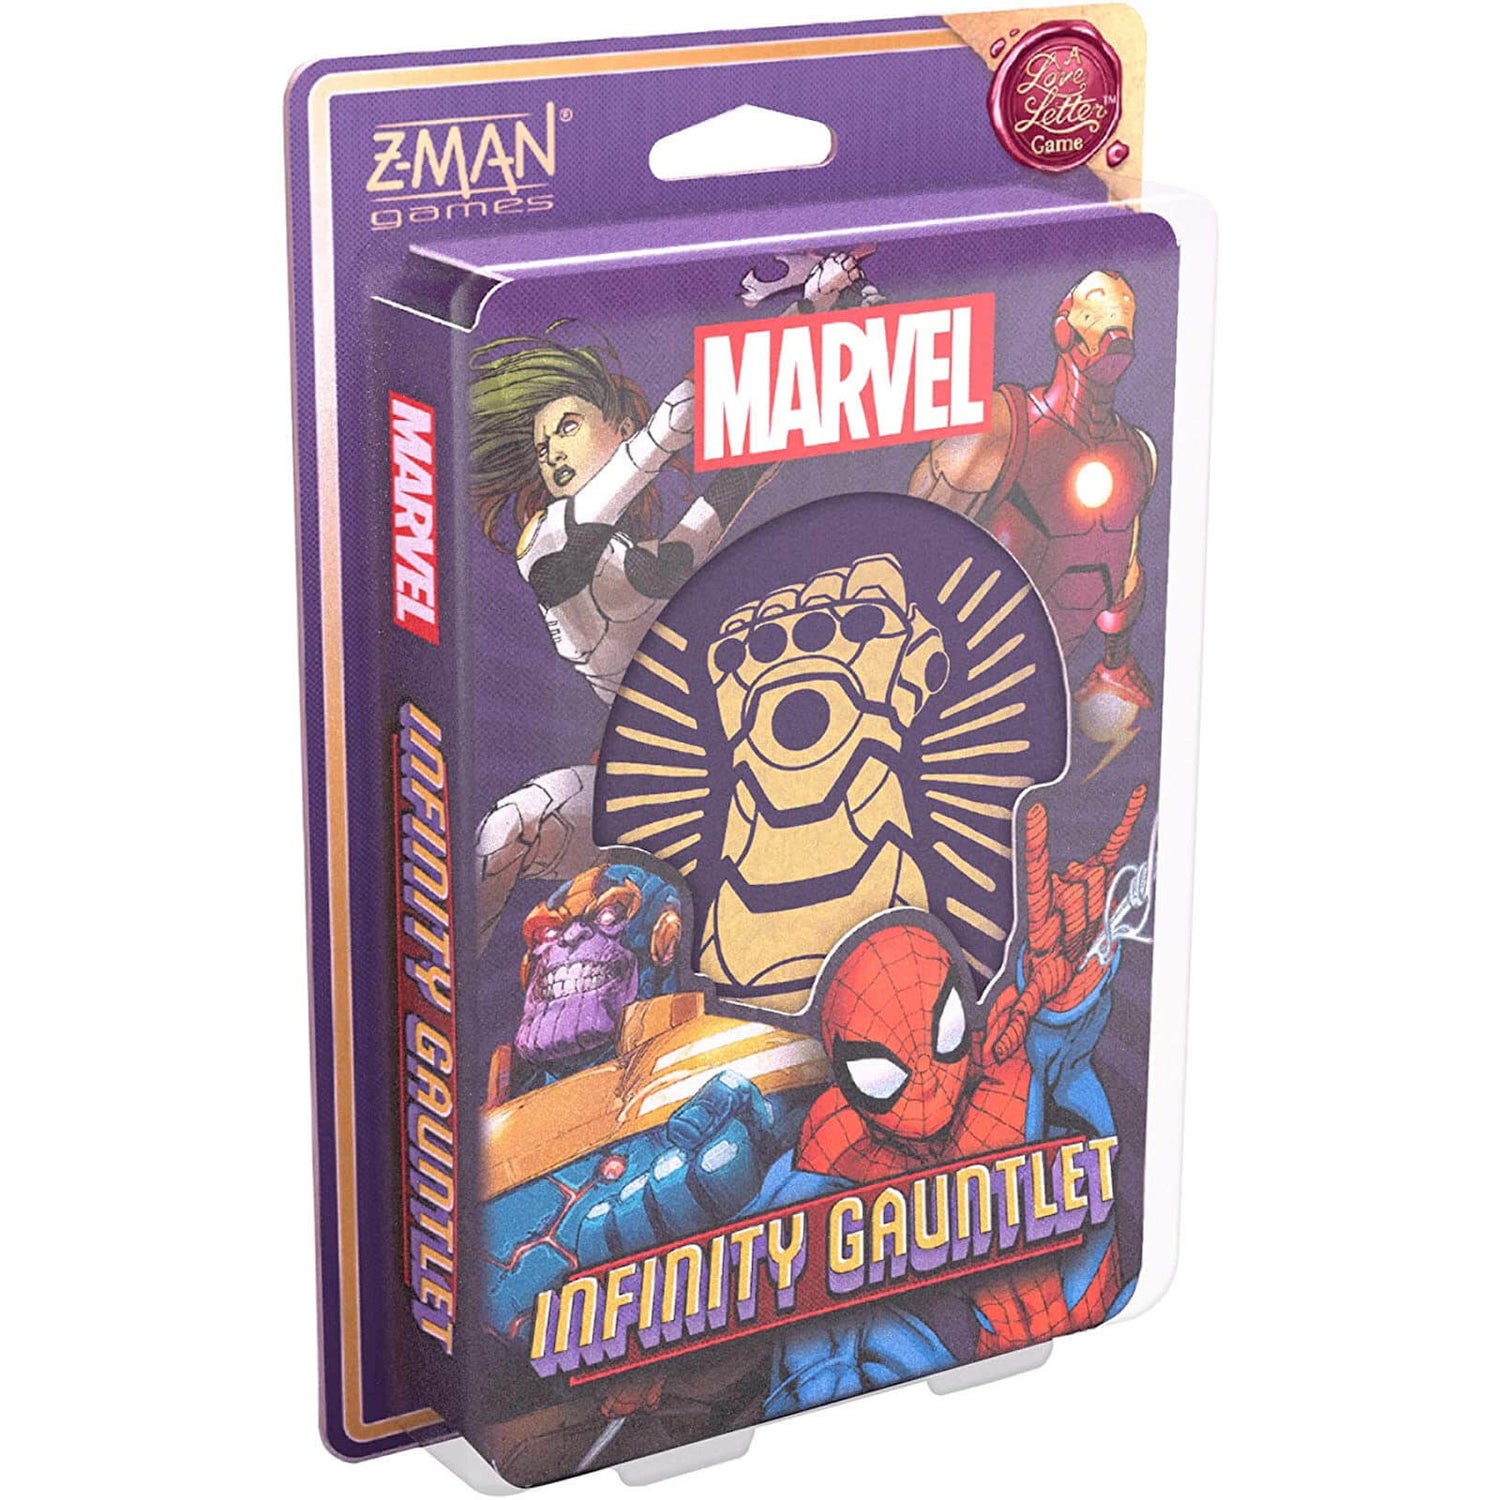 A Love Letter Card Game - Infinity Gauntlet Edition